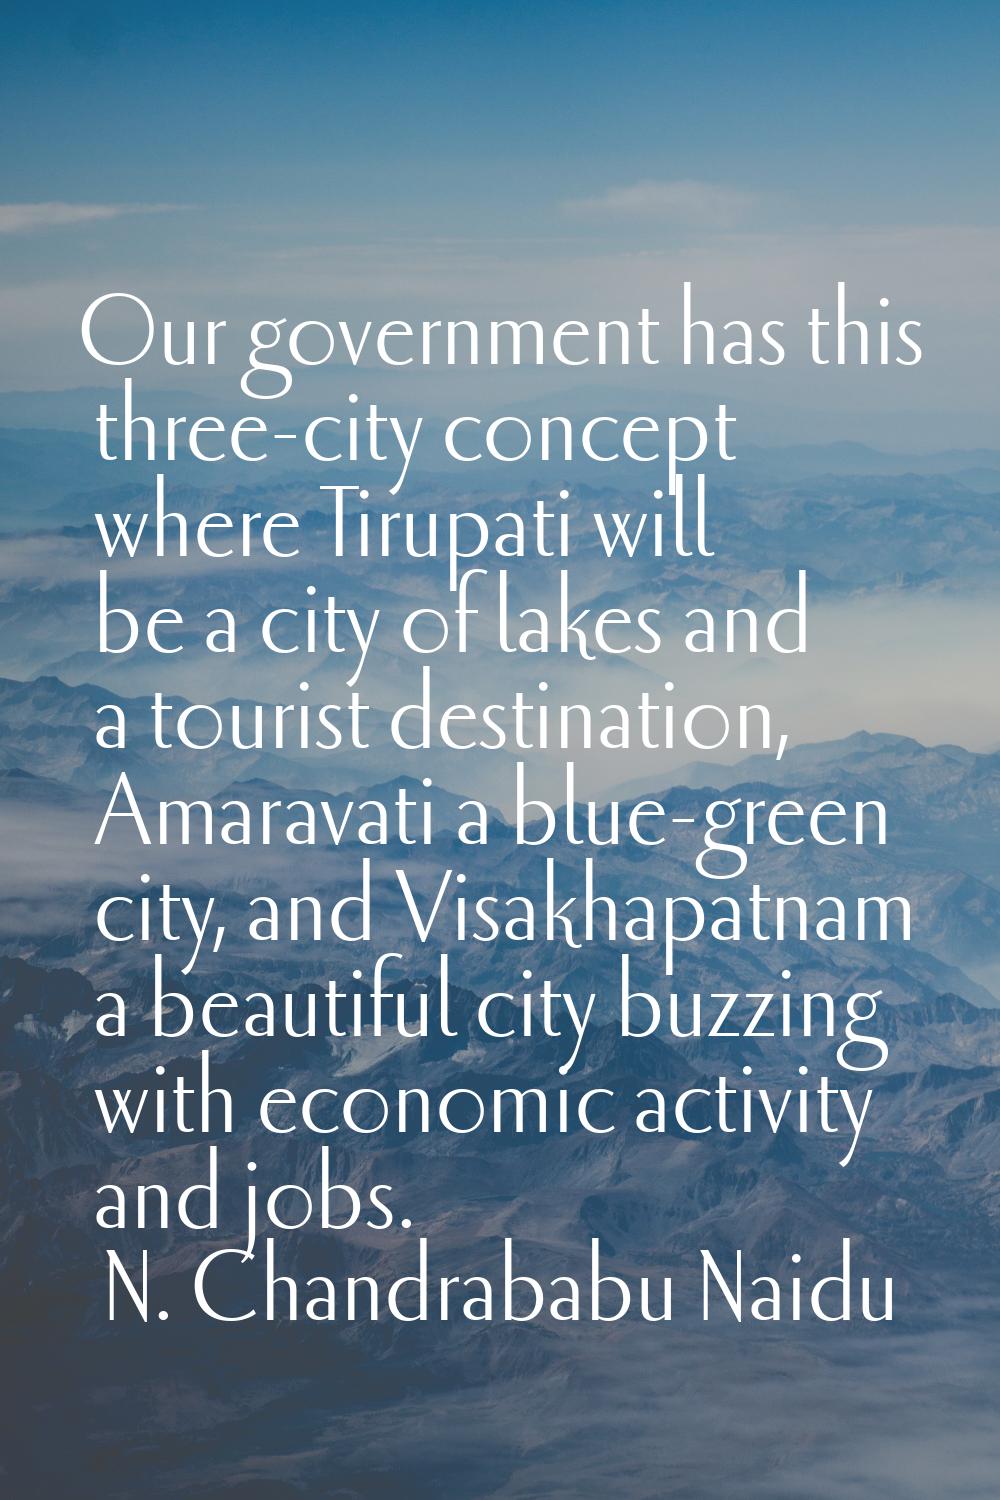 Our government has this three-city concept where Tirupati will be a city of lakes and a tourist des